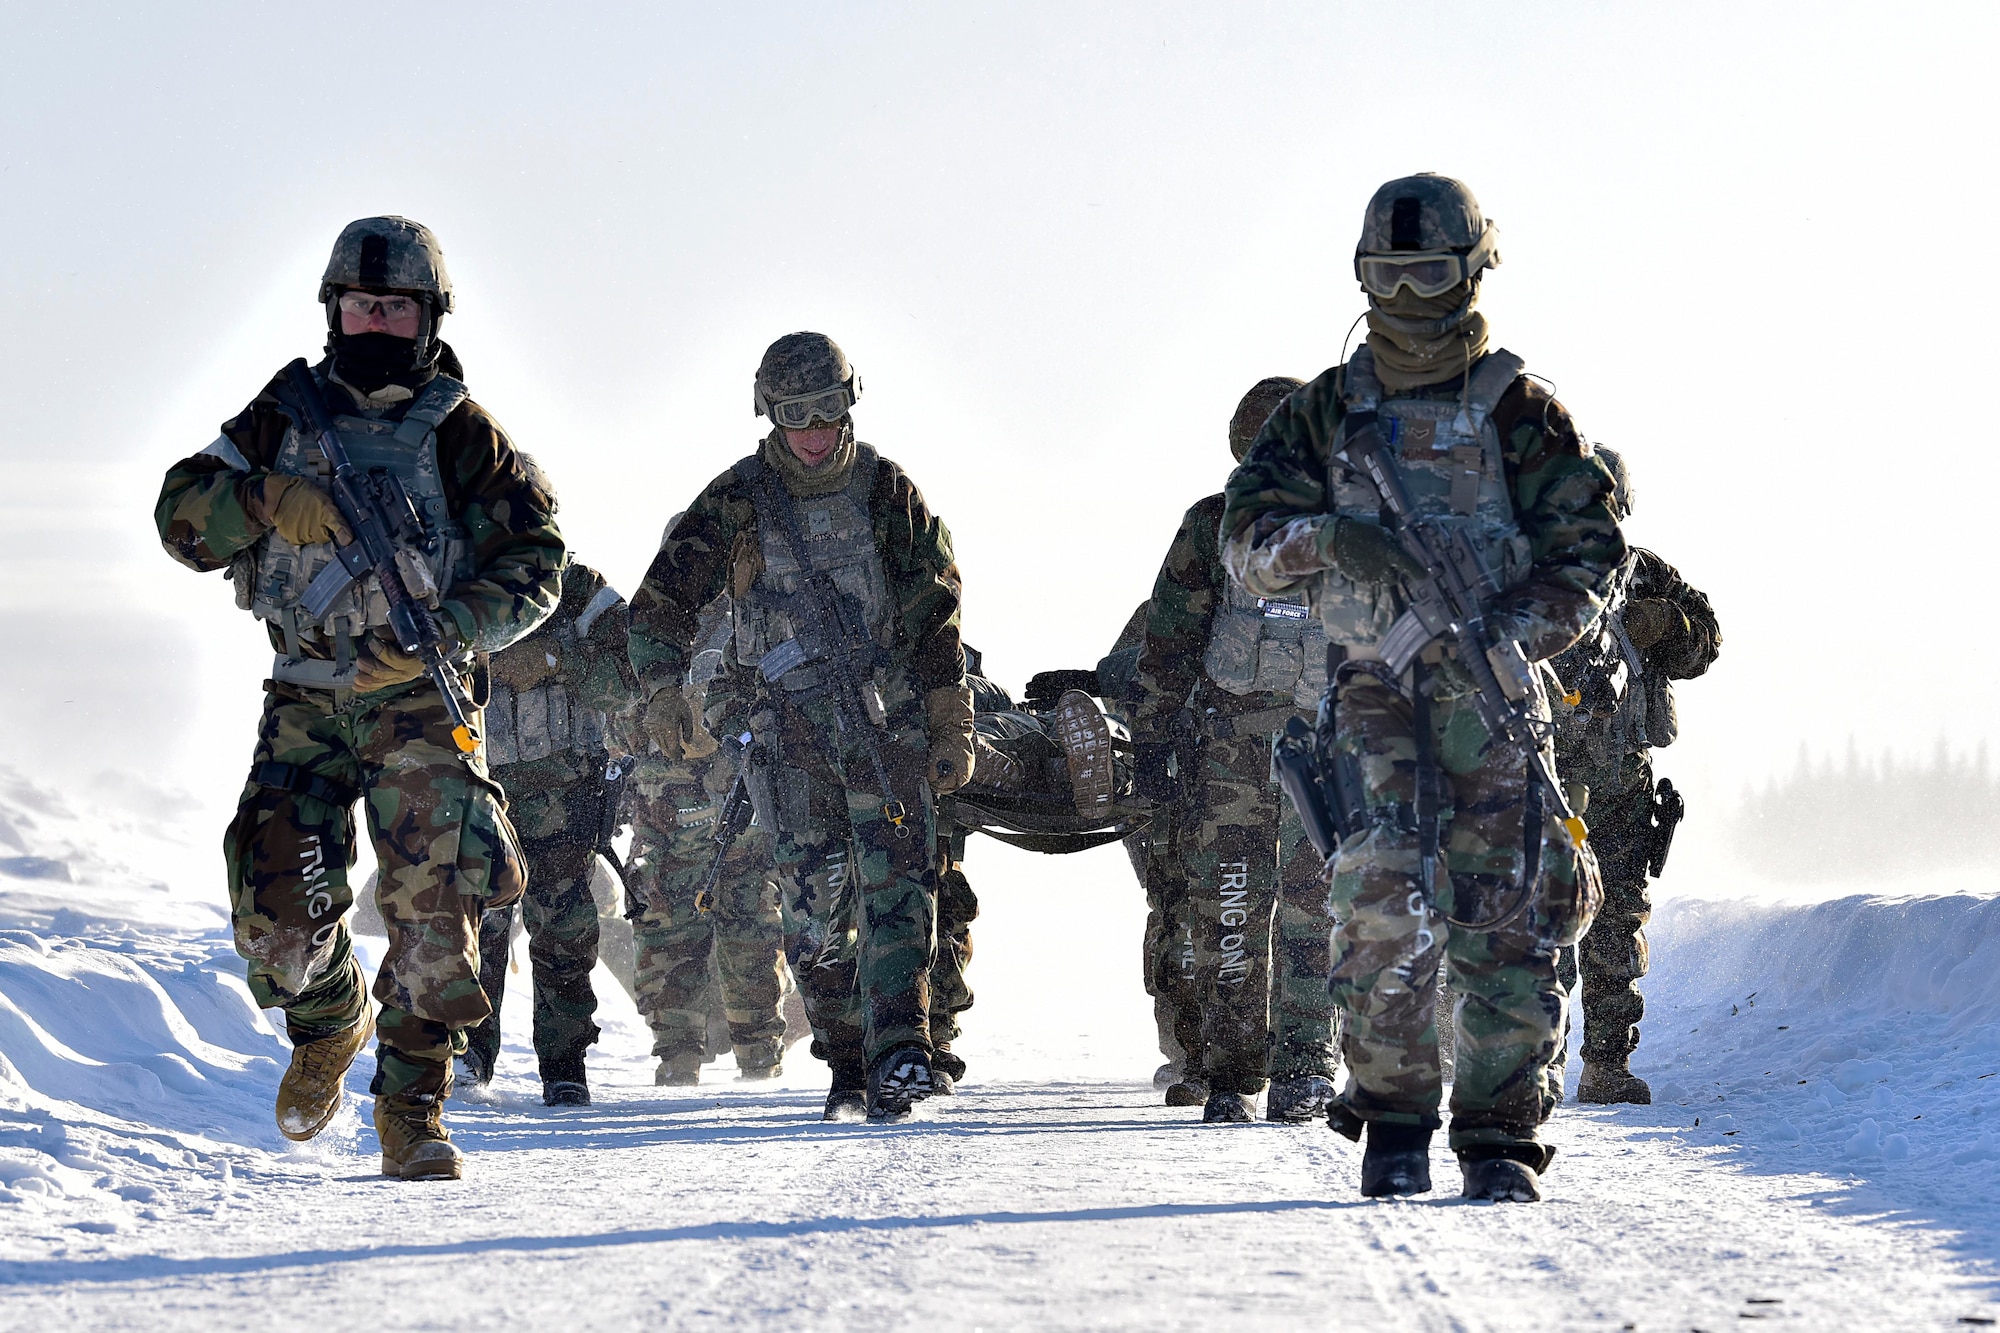 354th Security Forces Squadron defenders carry a simulated casualty during a medical evacuation exercise on Eielson Air Force Base, Alaska, Feb. 26, 2020. The defenders simulated taking small-arms fire and evacuating a casualty to a UH-60 Blackhawk assigned to the 1-52D General Support Aviation Battalion. (U.S. Air Force photo by Senior Airman Beaux Hebert)